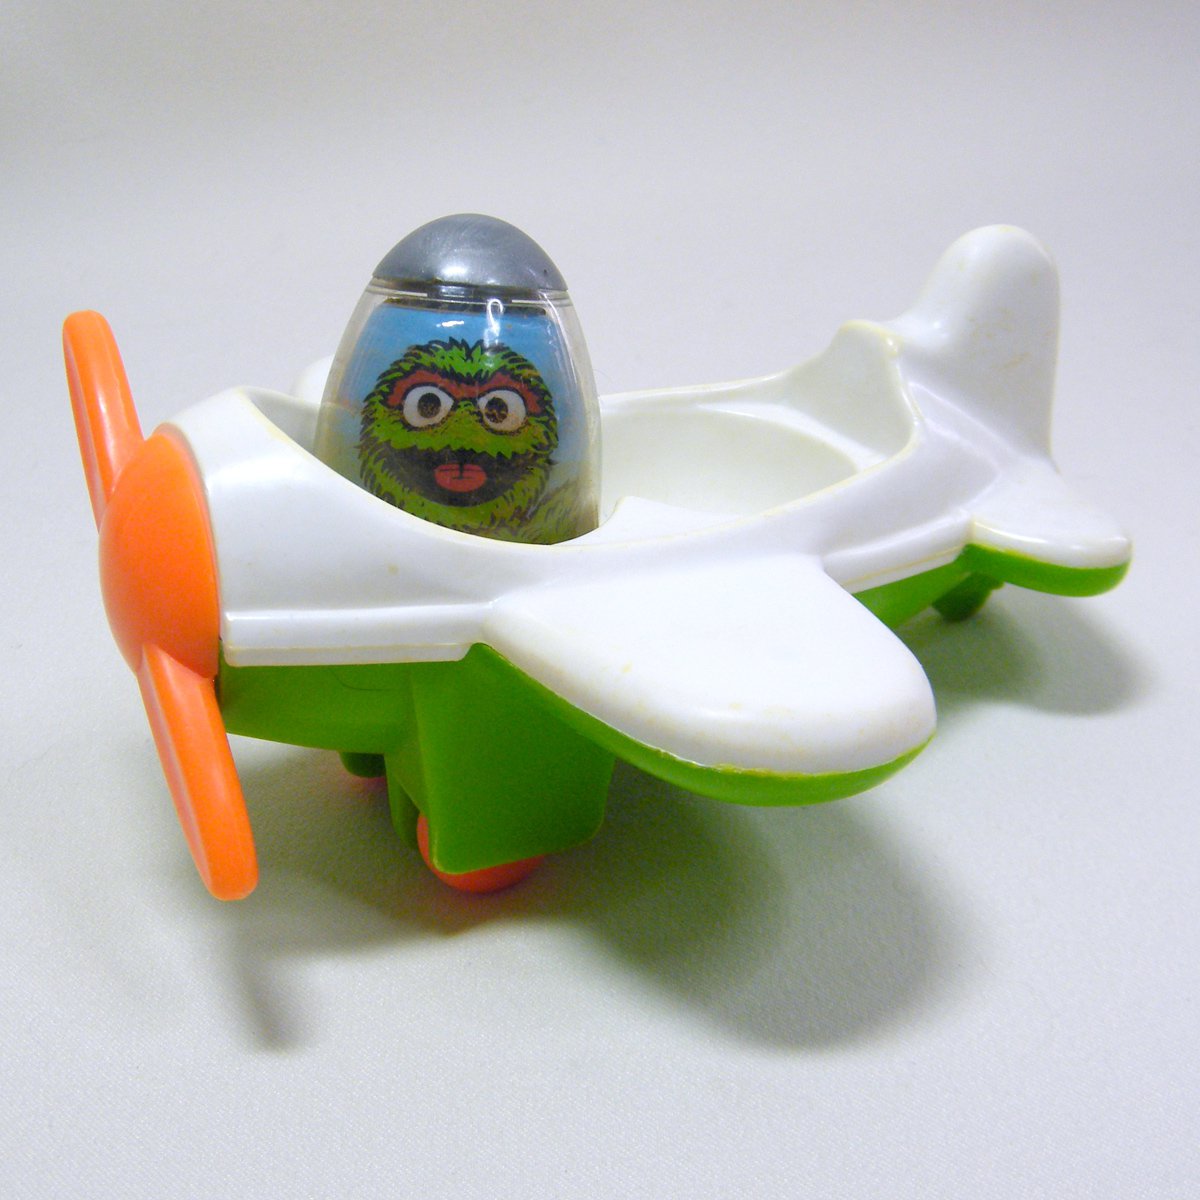 Vintage Weebles Plane and OSCAR the Grouch Muppet 1982 Hasbro